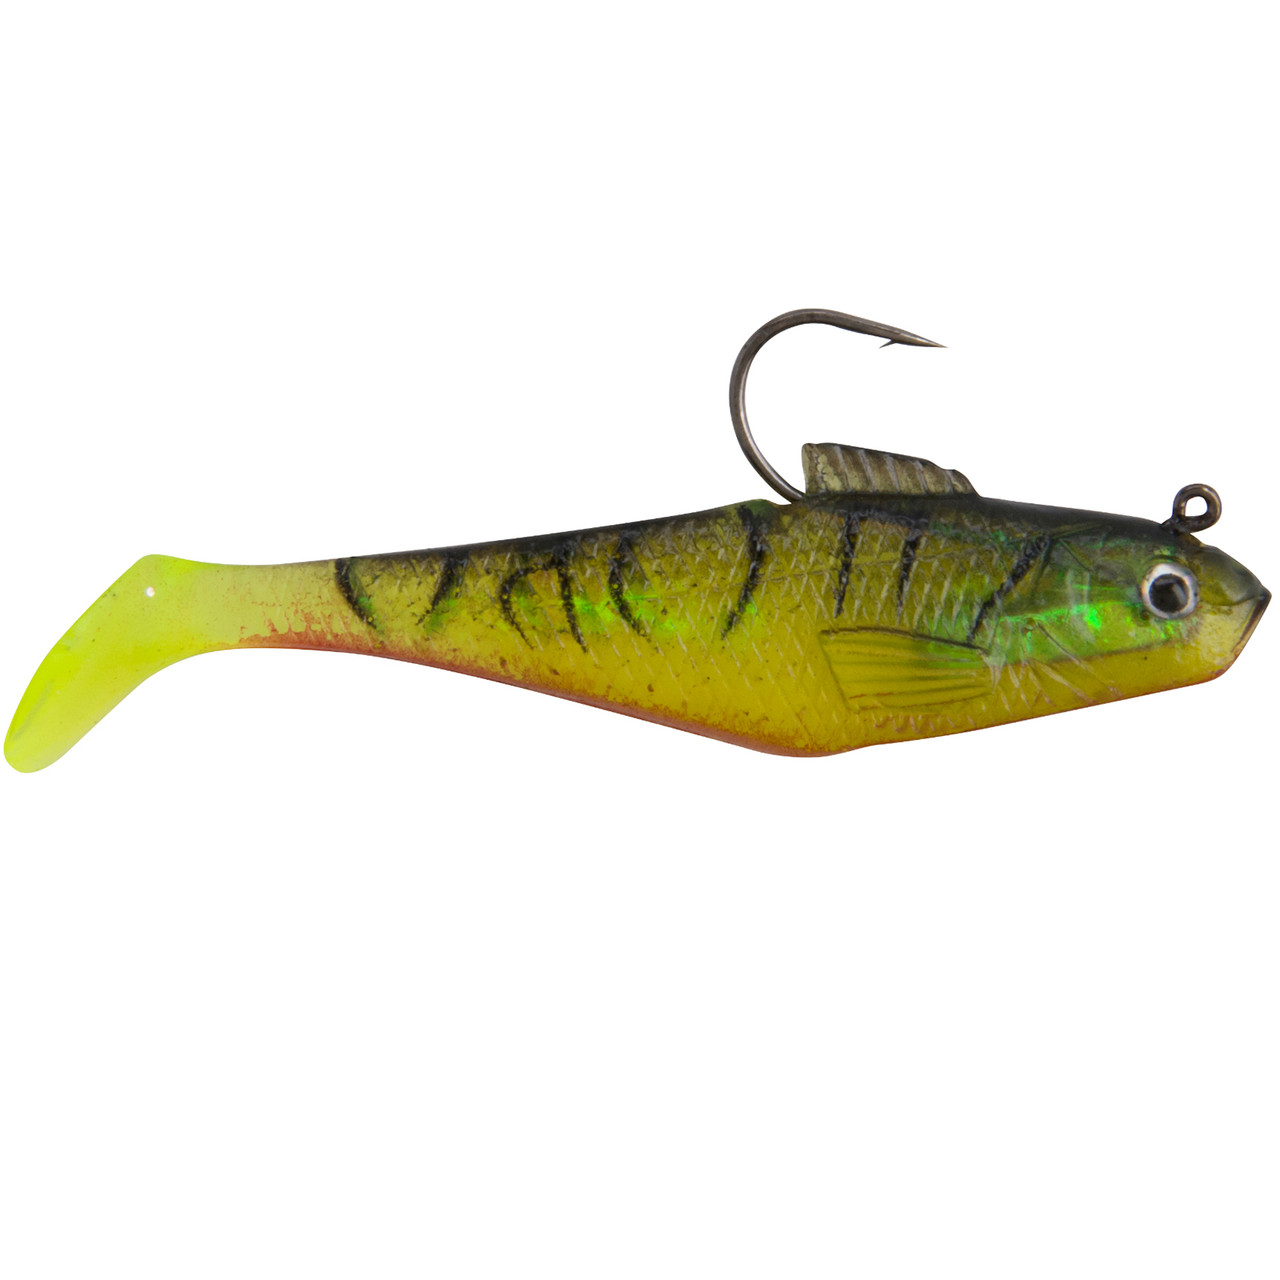 RubberBaits 3.3 Rigged Baby Perch Soft Swimbait